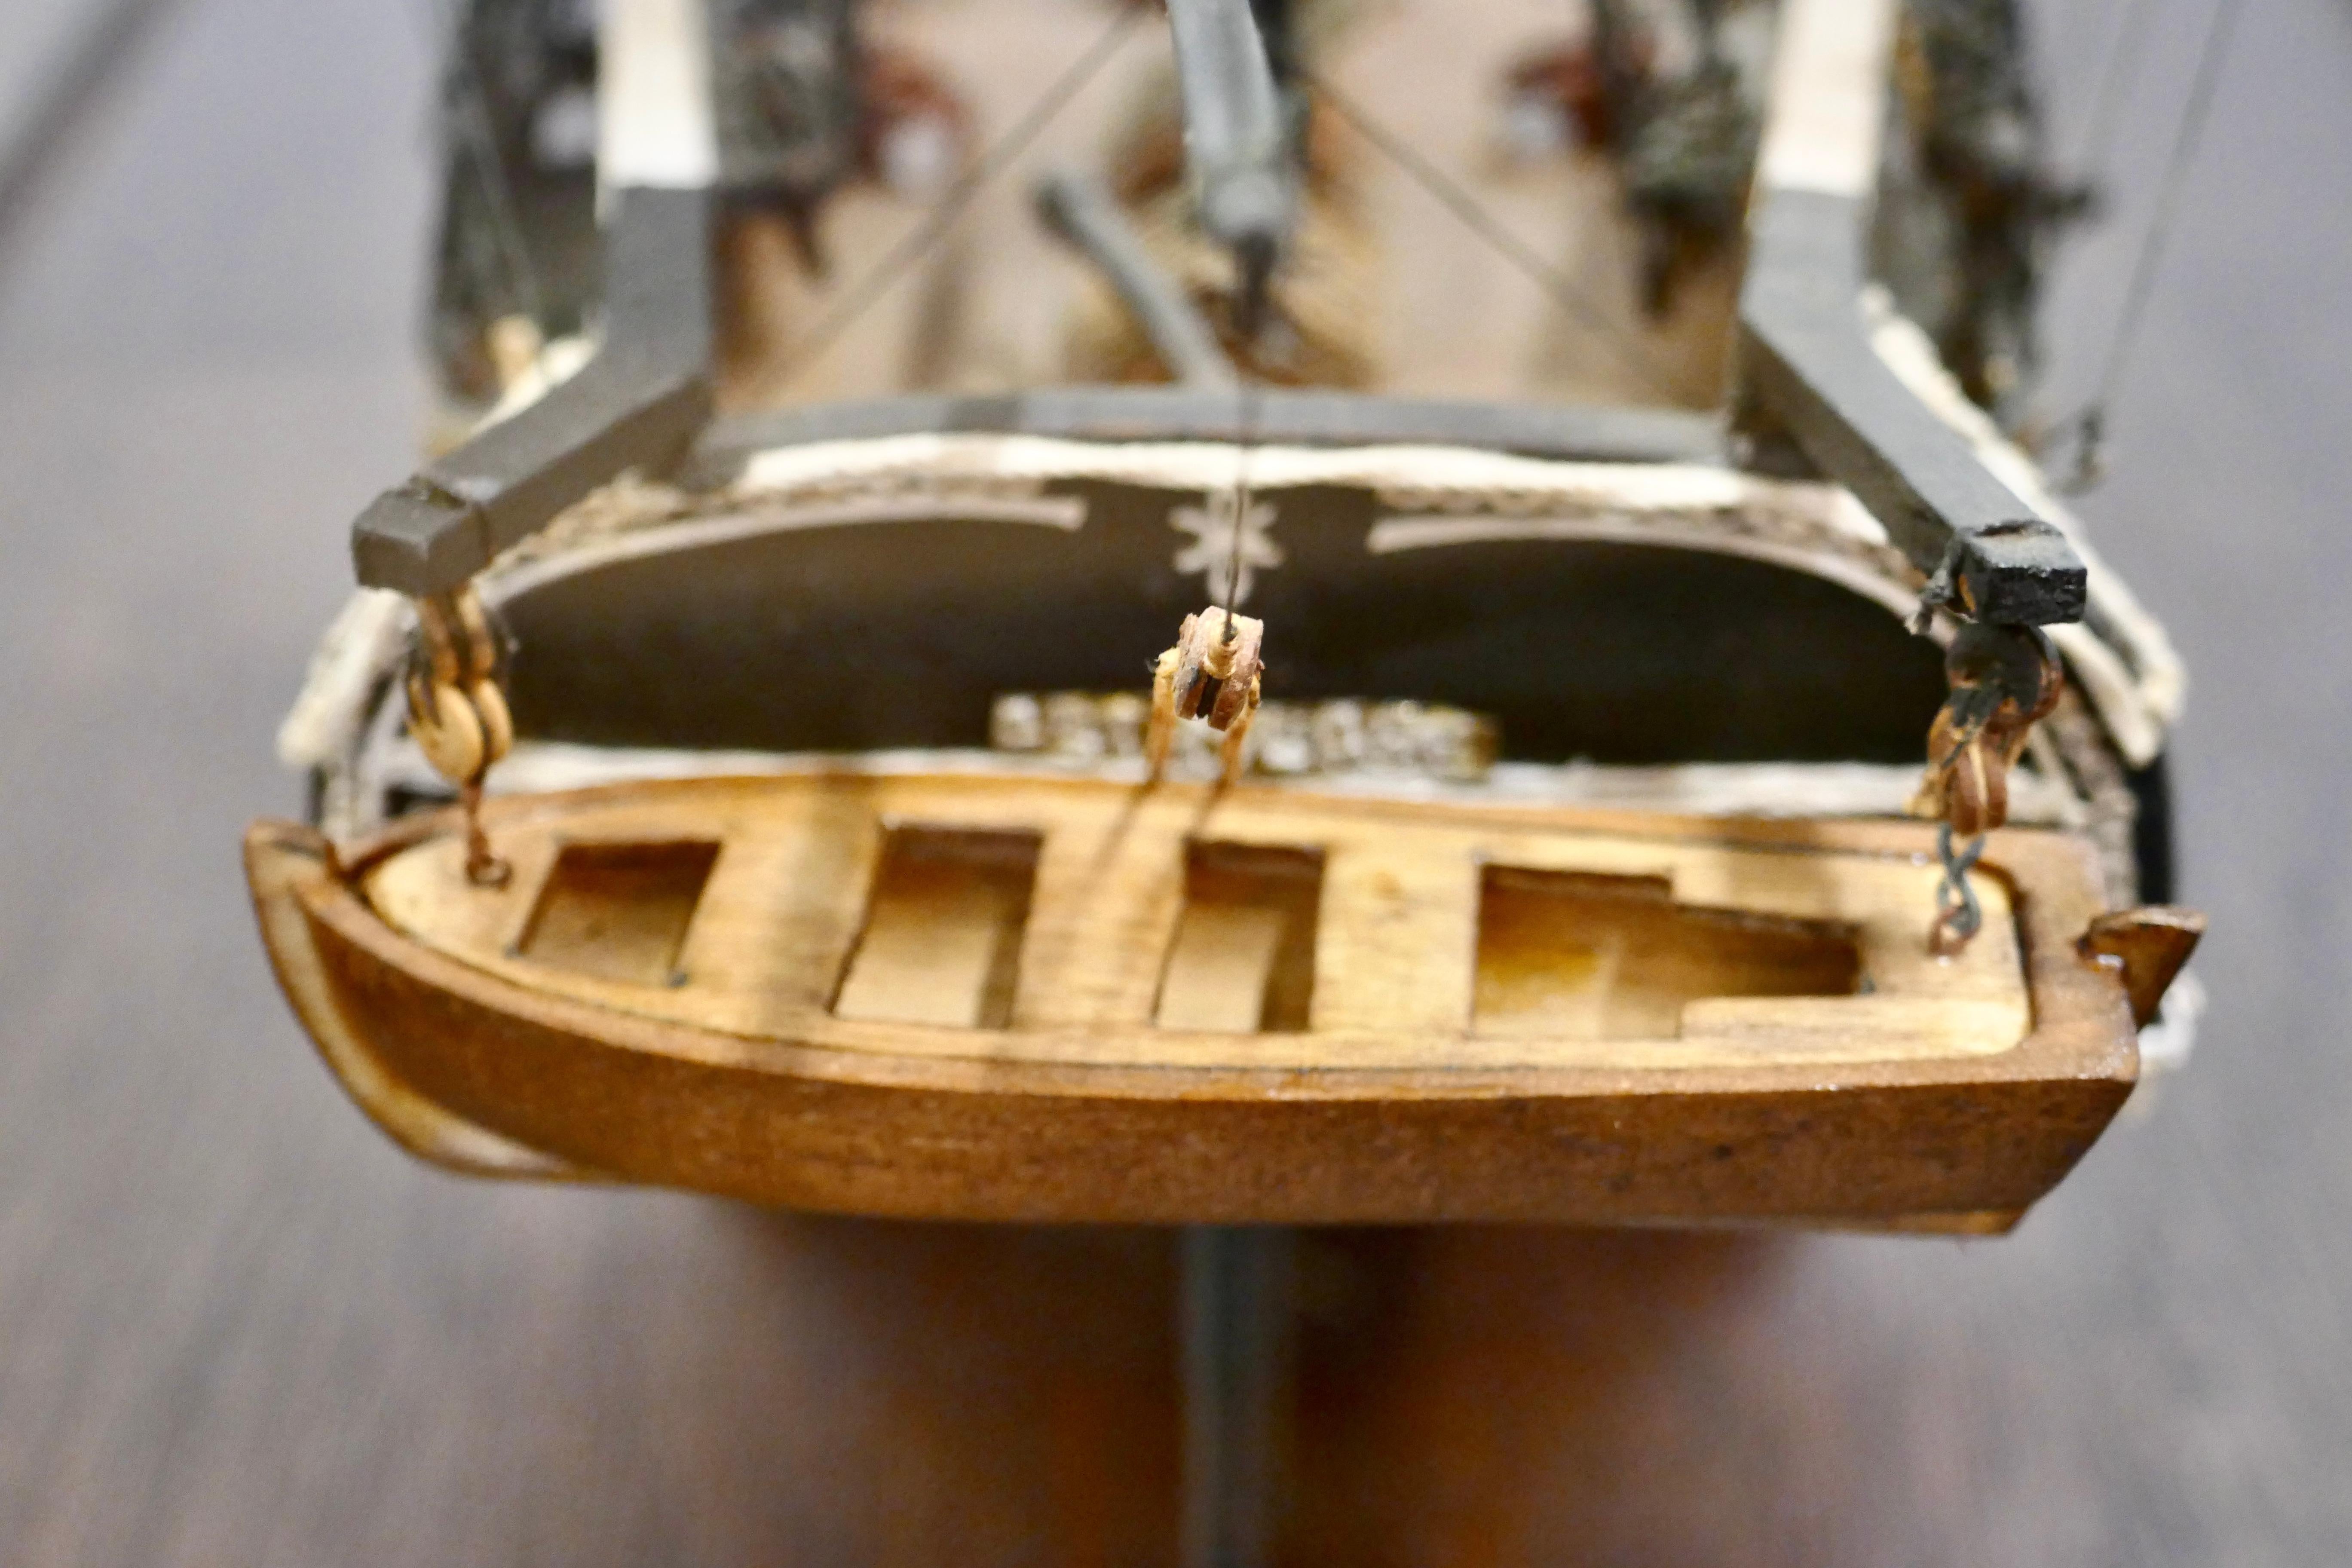 A Model of the French Ship Astrolabe in display case

The Astrolabe was built by Toulon Shipyard in France and was launched in 1811 it was a horse barge converted to a French Navy exploration ship The original name of the Astrolabe was